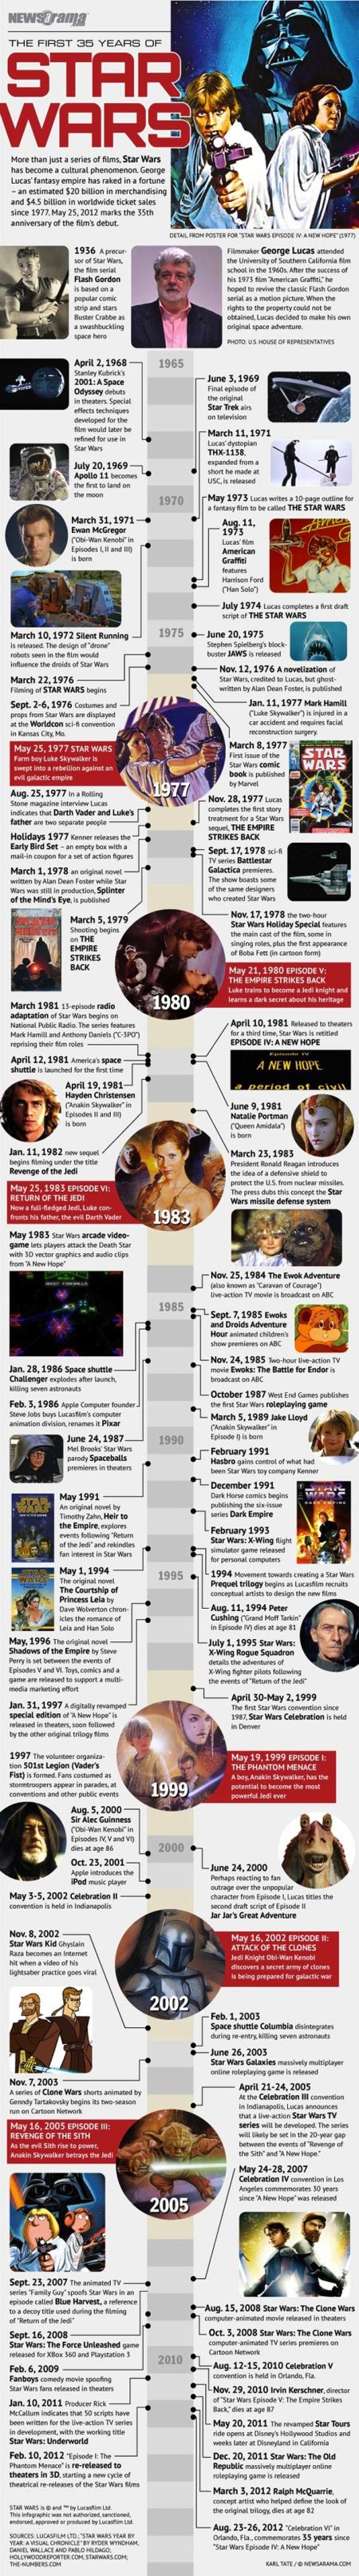 the first 35 years of Star Wars